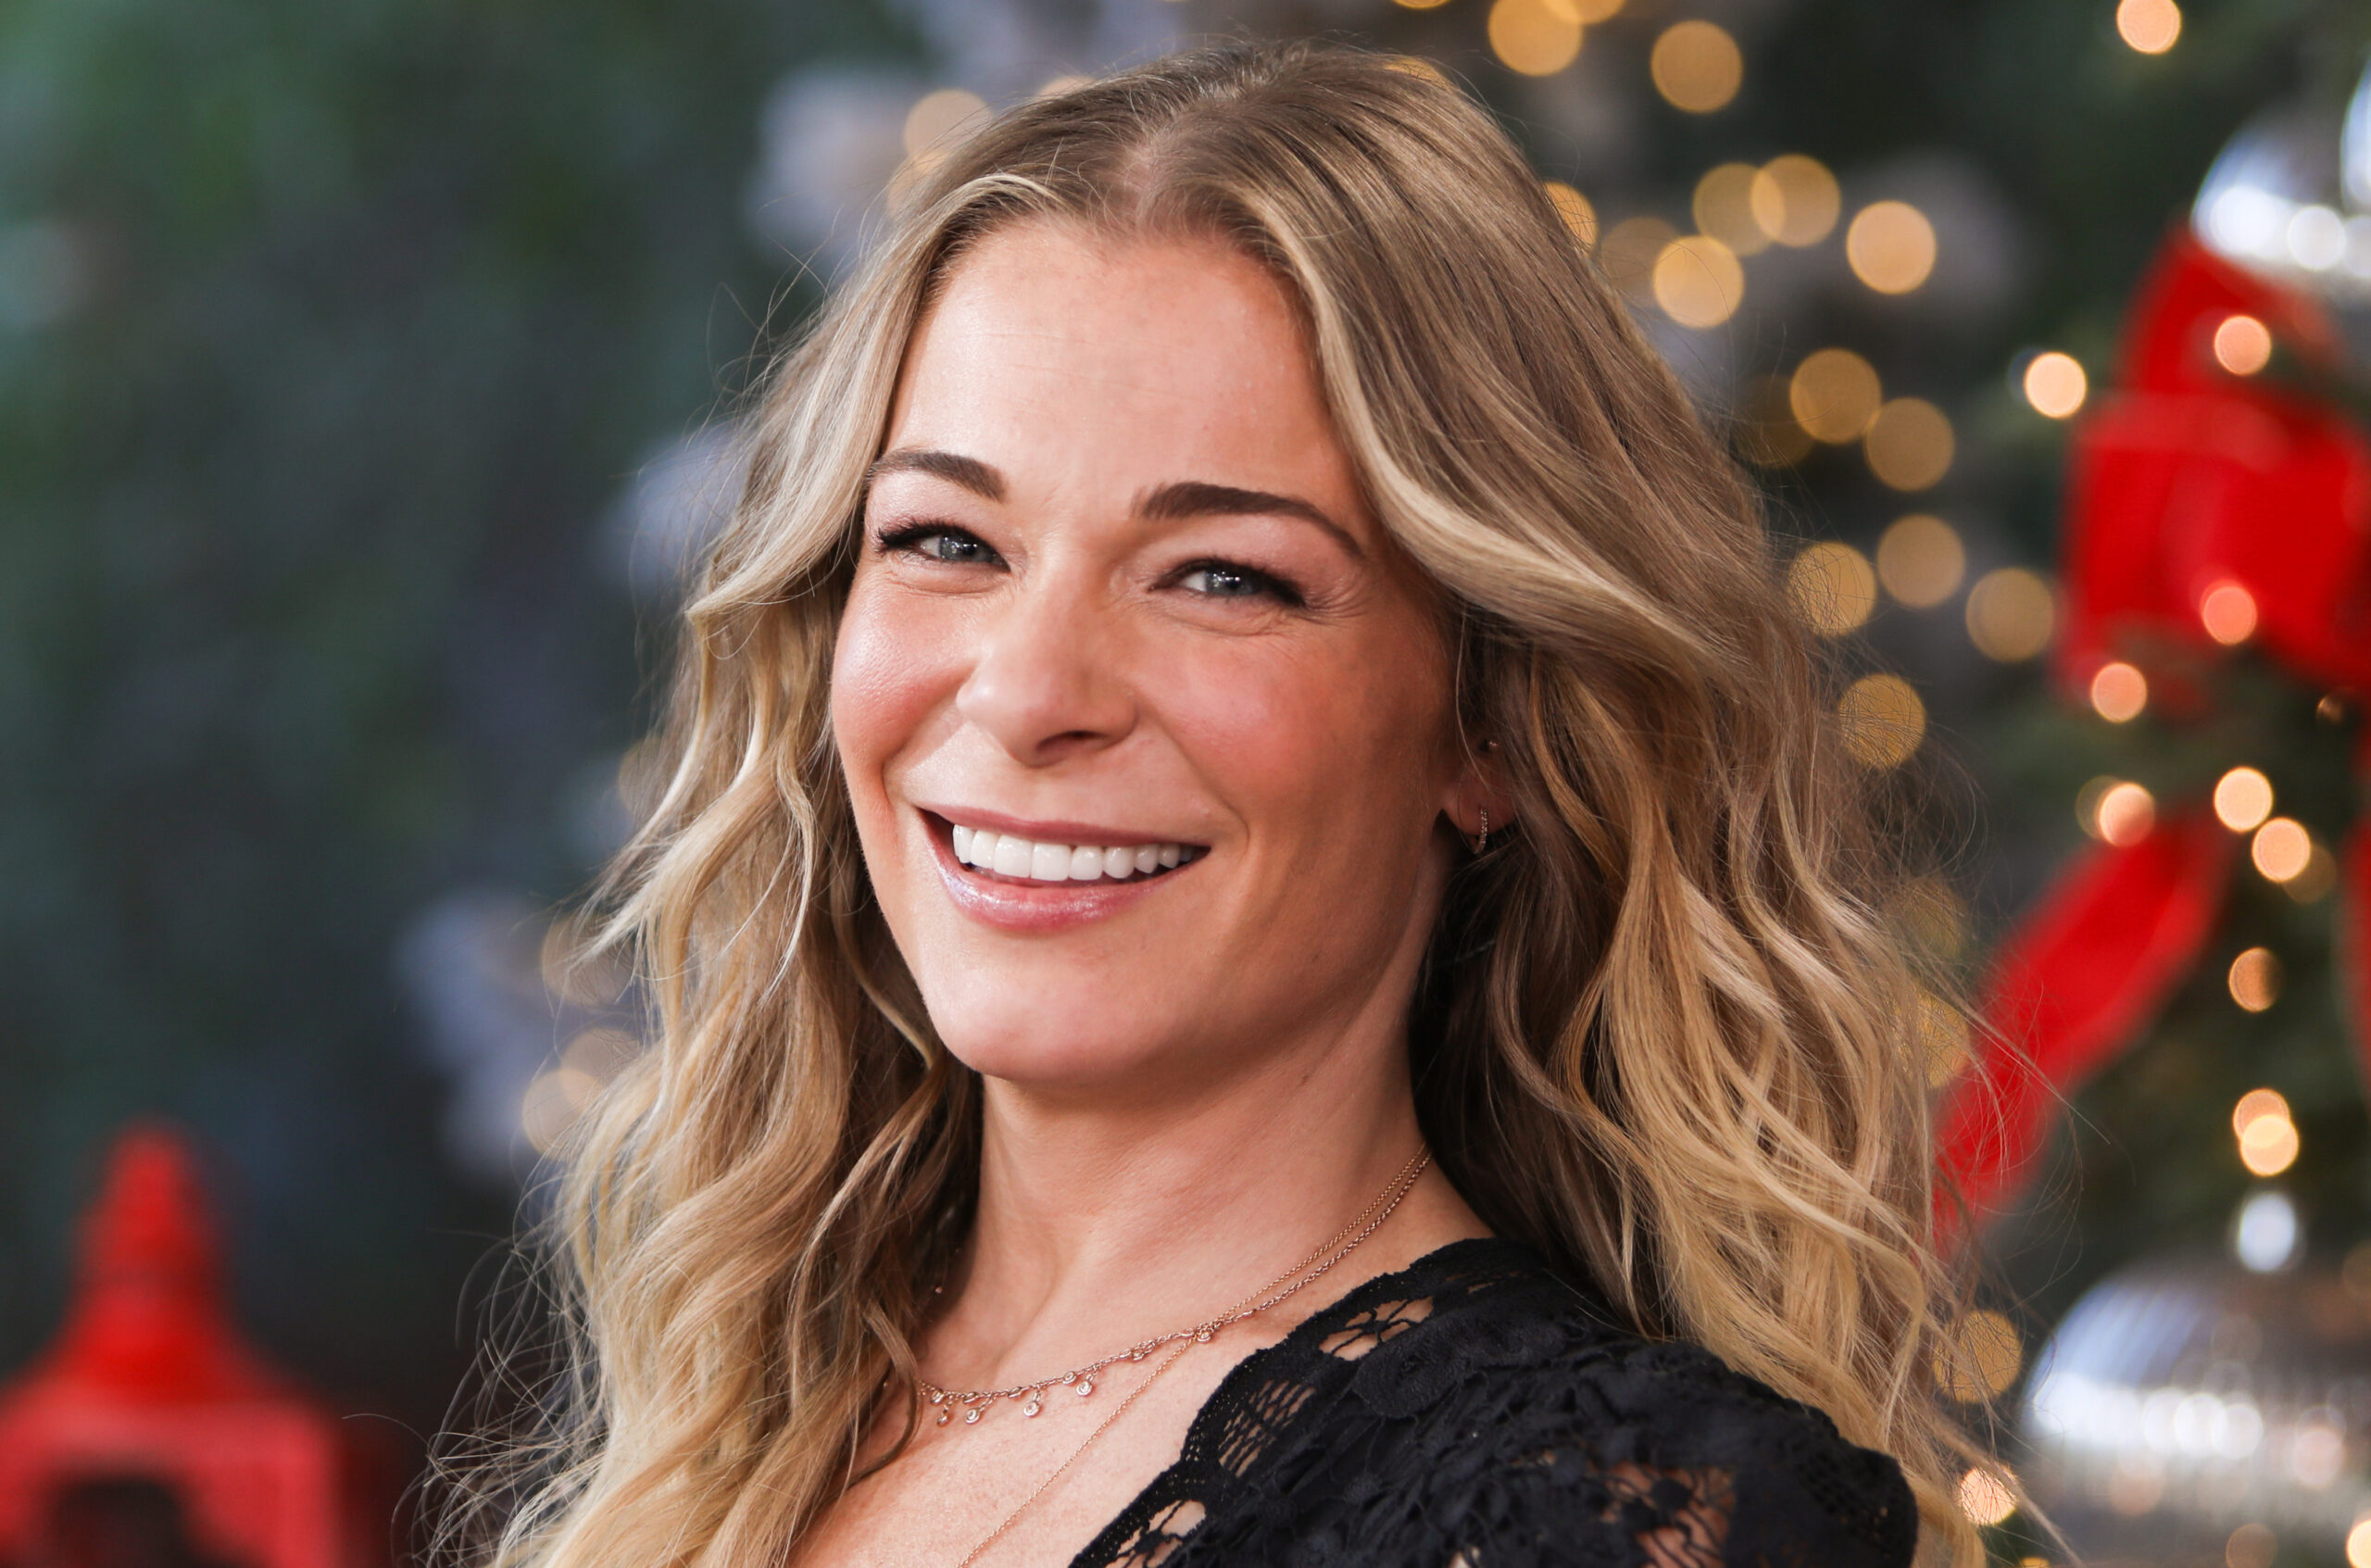 LeAnn Rimes Postpones Shows Because Of ‘Bleed’ On Vocal Cord